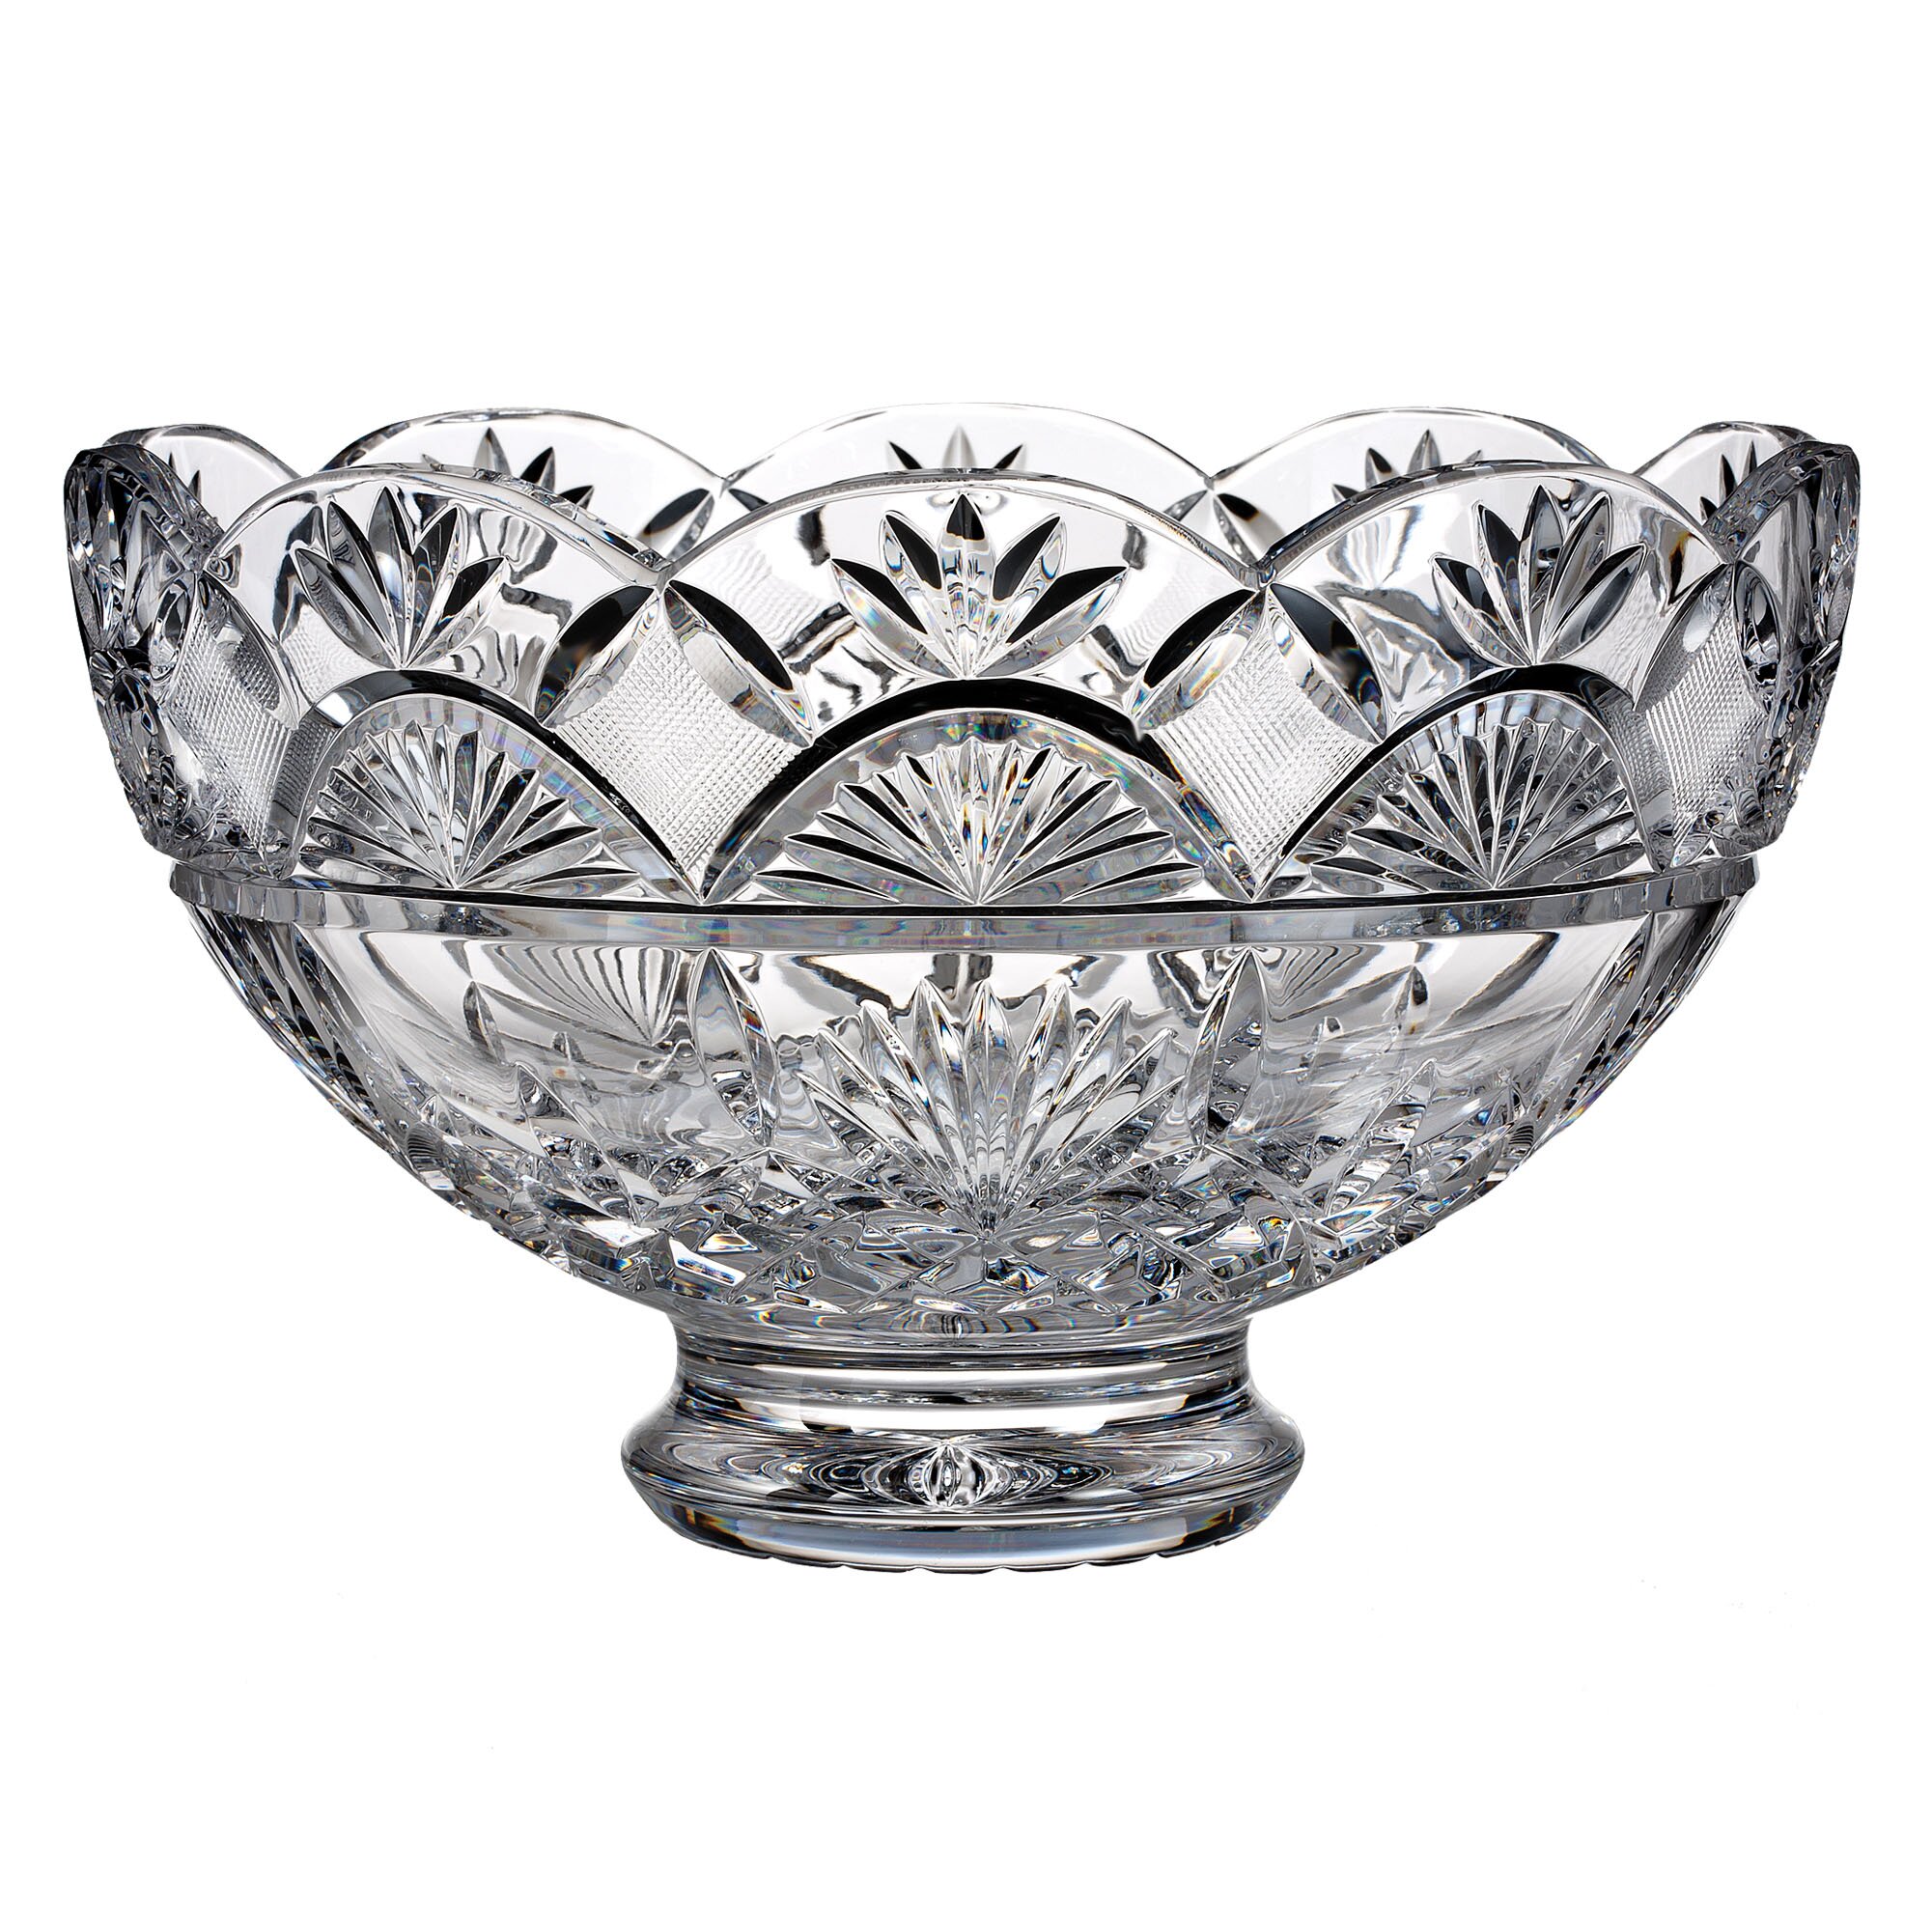 Jim O'Leary Lismore Celebrations Footed Centerpiece Decorative Bowl by ...